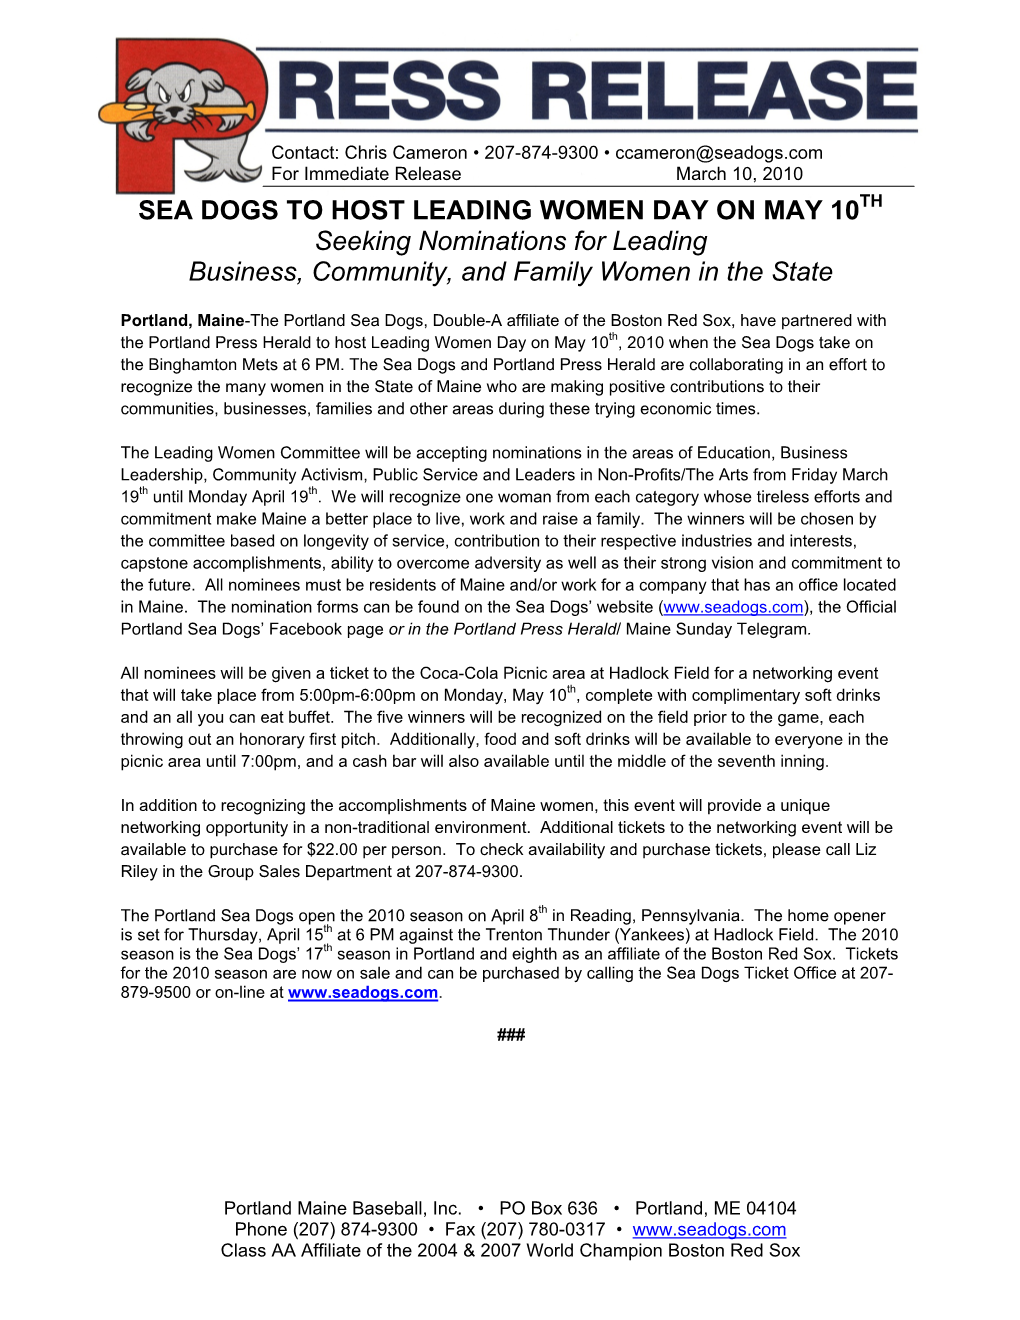 SEA DOGS to HOST LEADING WOMEN DAY on MAY 10 Seeking